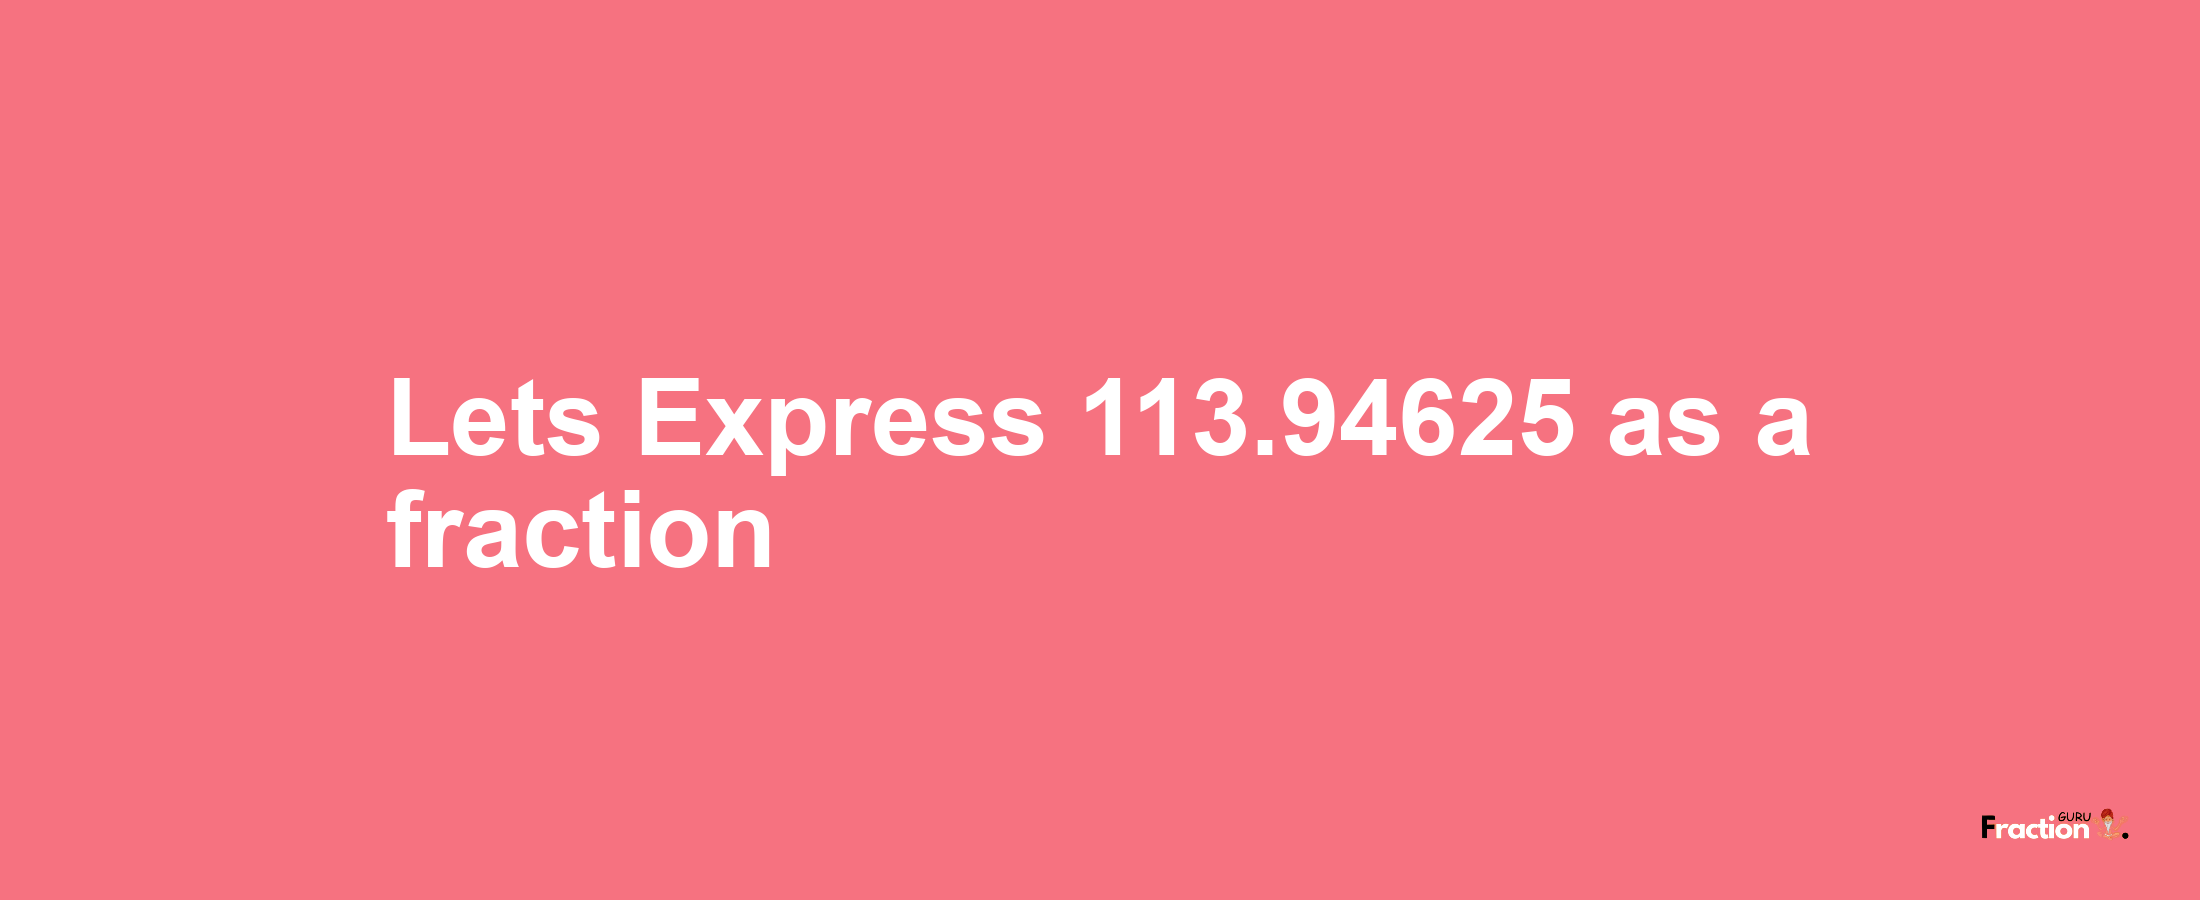 Lets Express 113.94625 as afraction